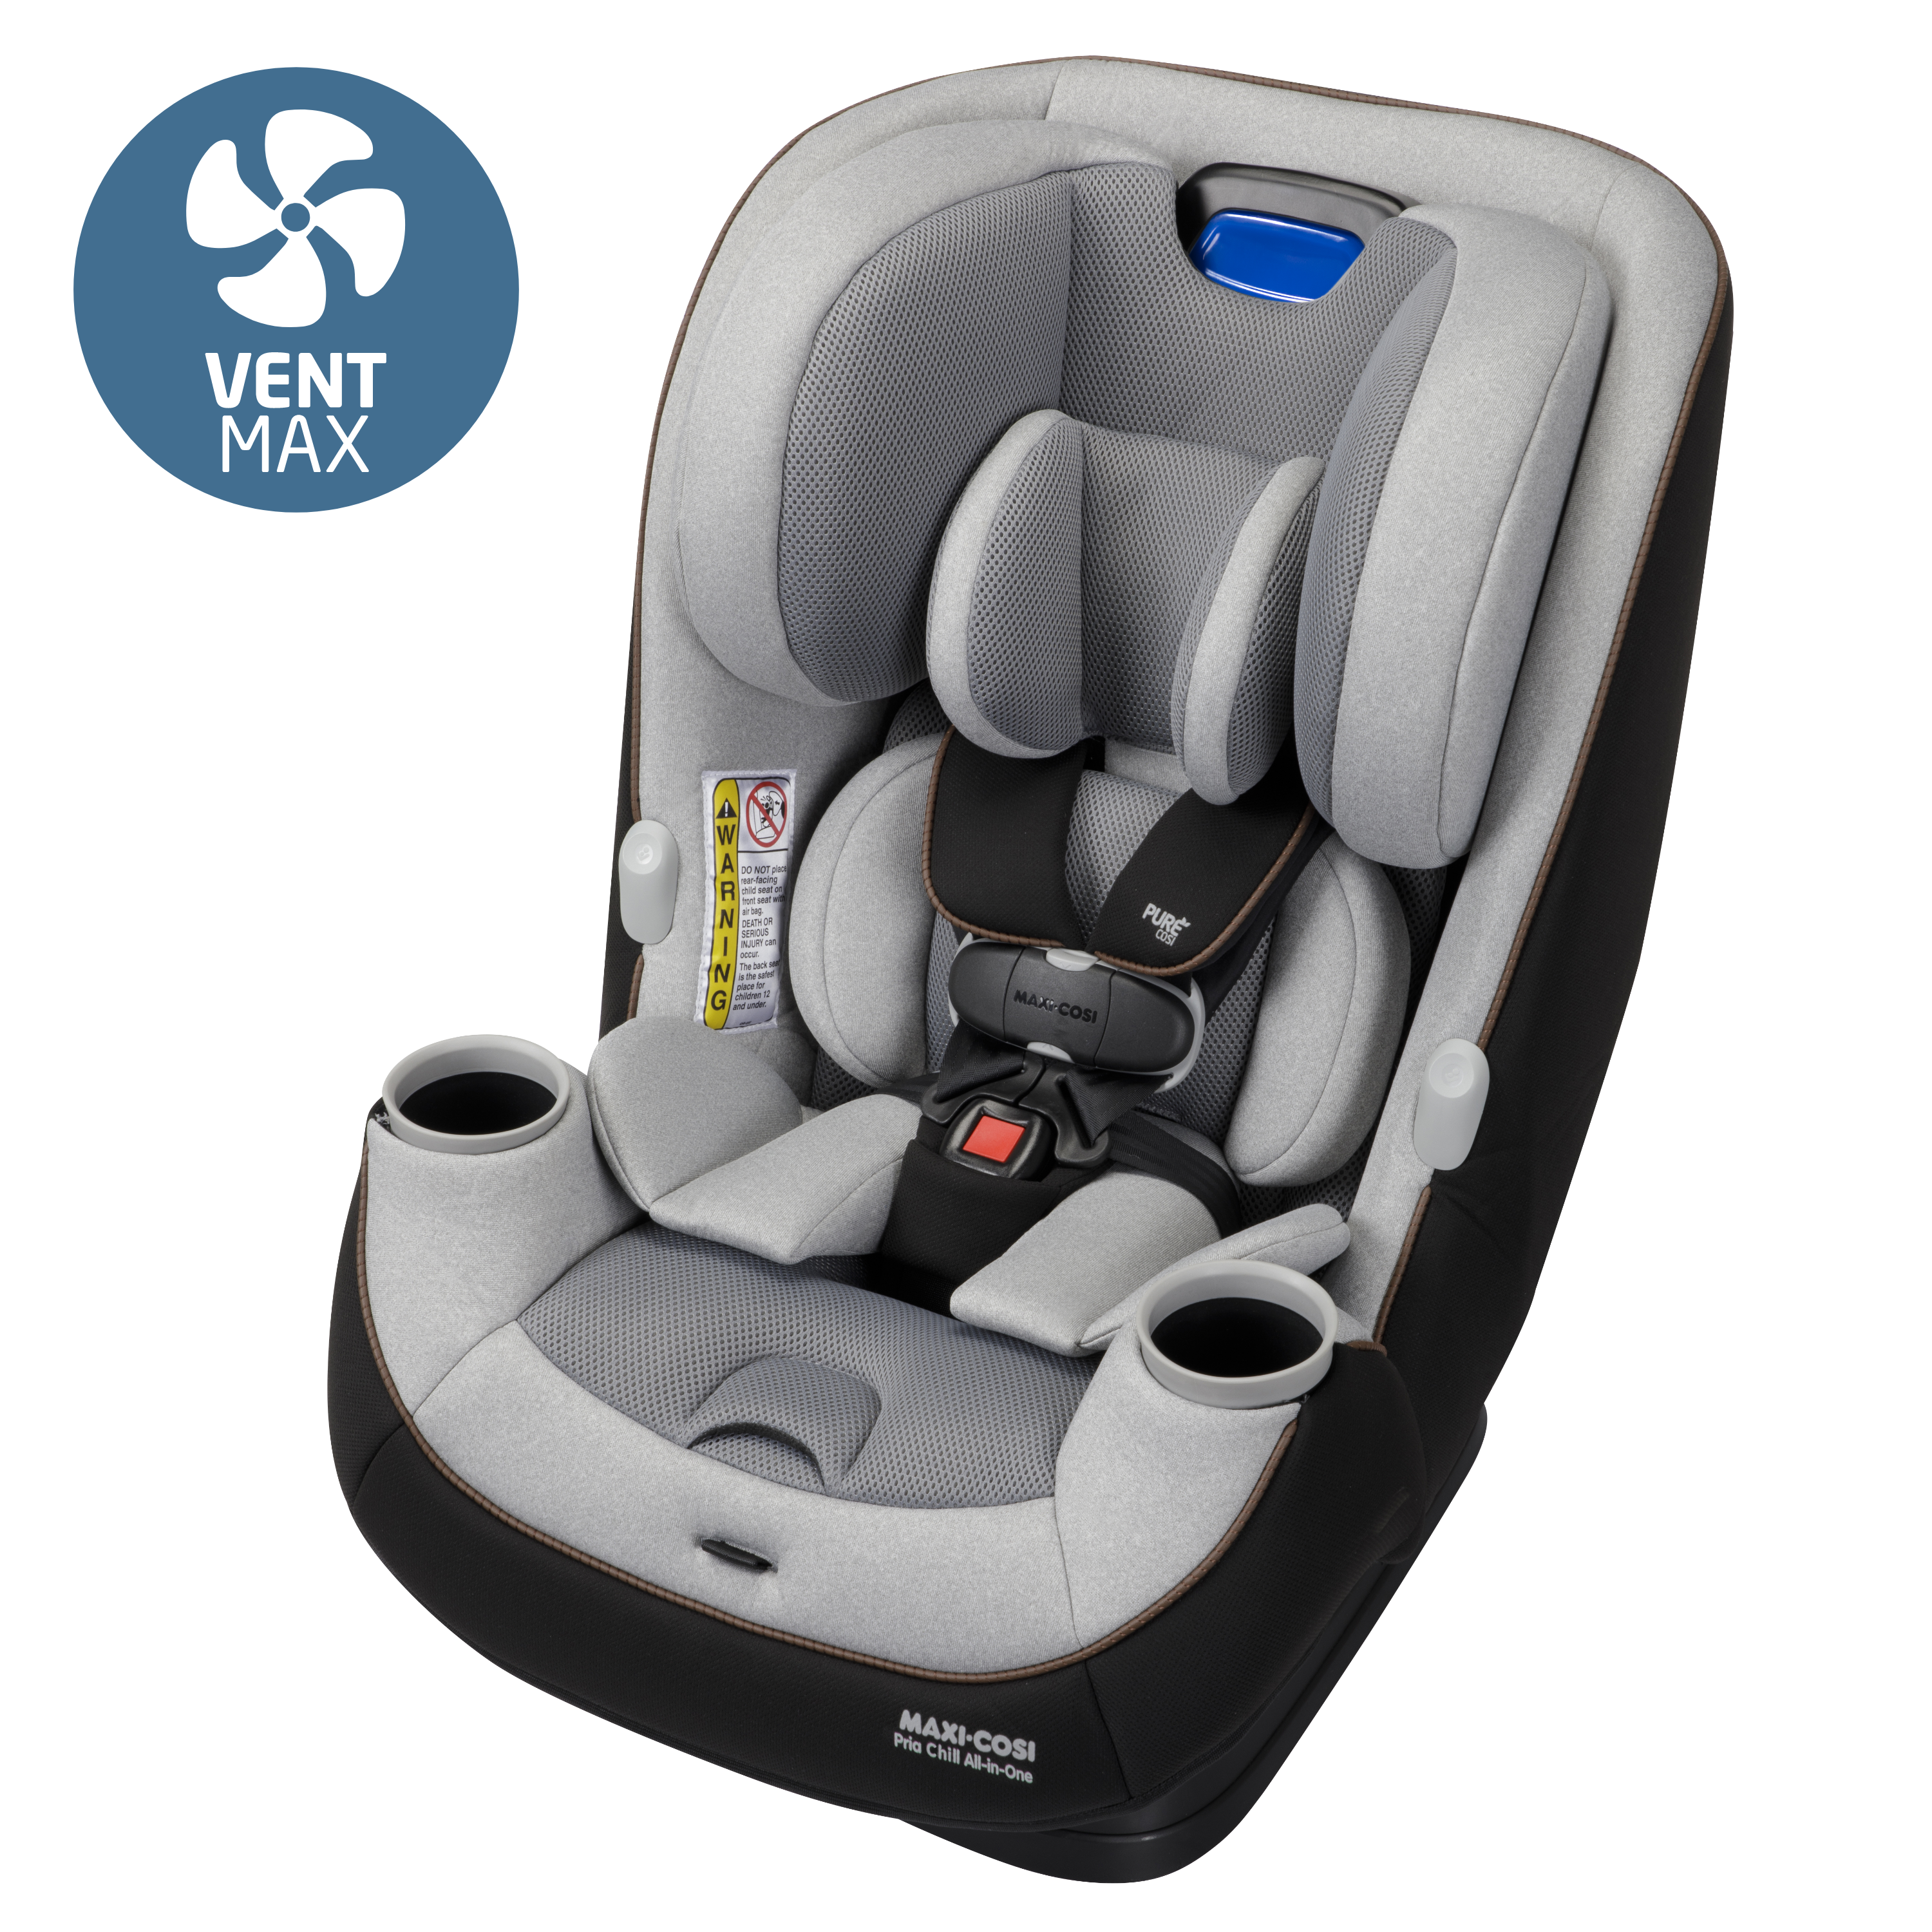 Pria™ Chill All-in-One Convertible Car Seat - with Ventmax technology